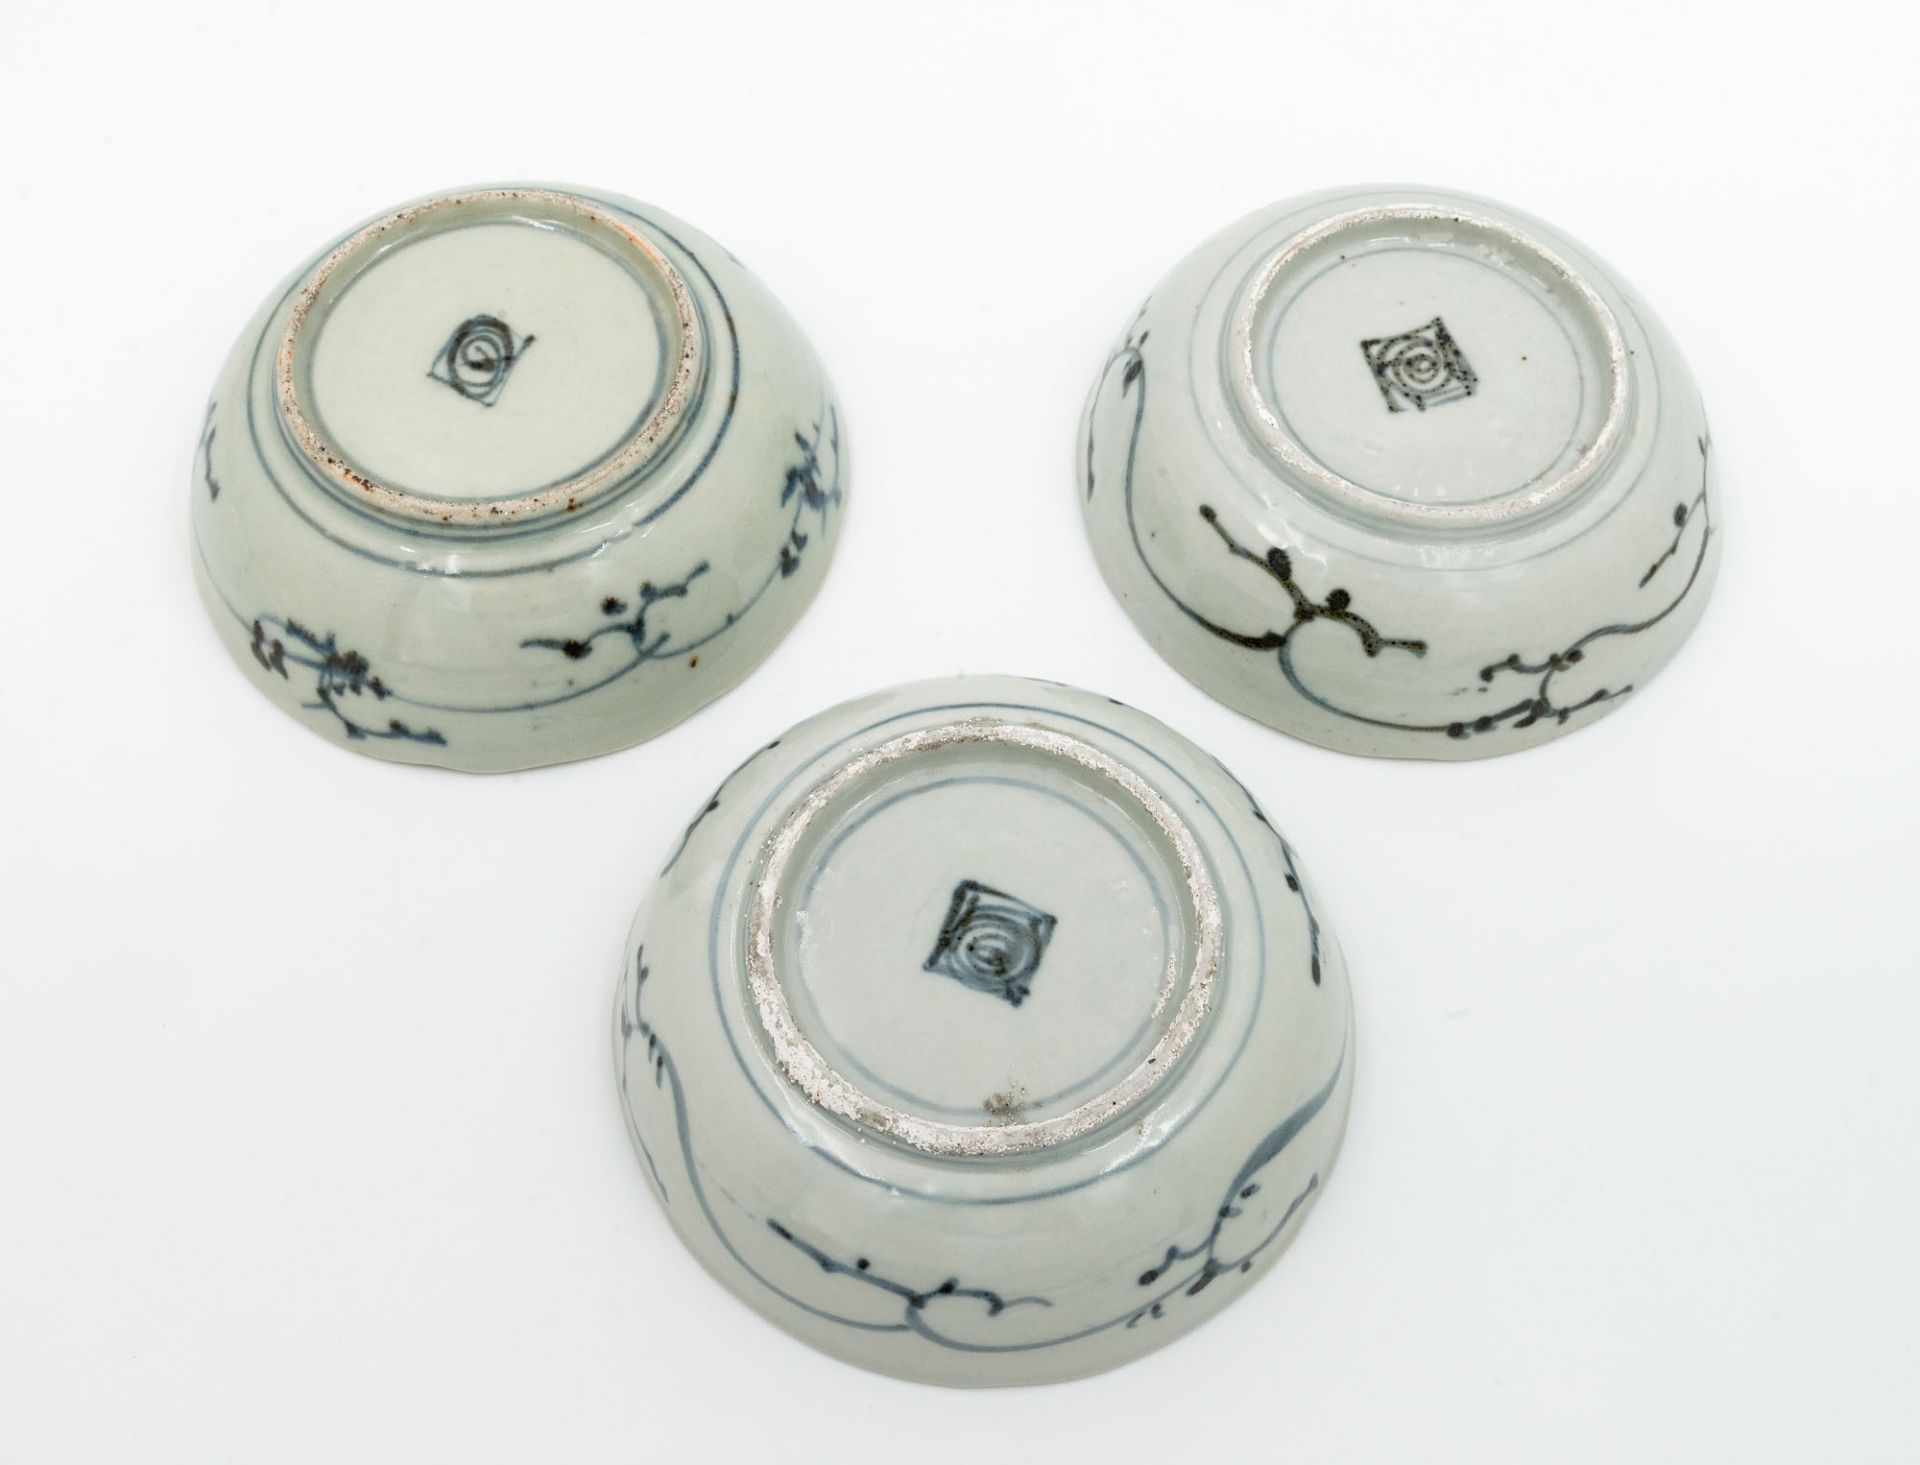 Three Blue and White Porcelain Swatow Deep Plates in the Yongle Style, China, Mid 19th Century - Image 3 of 3